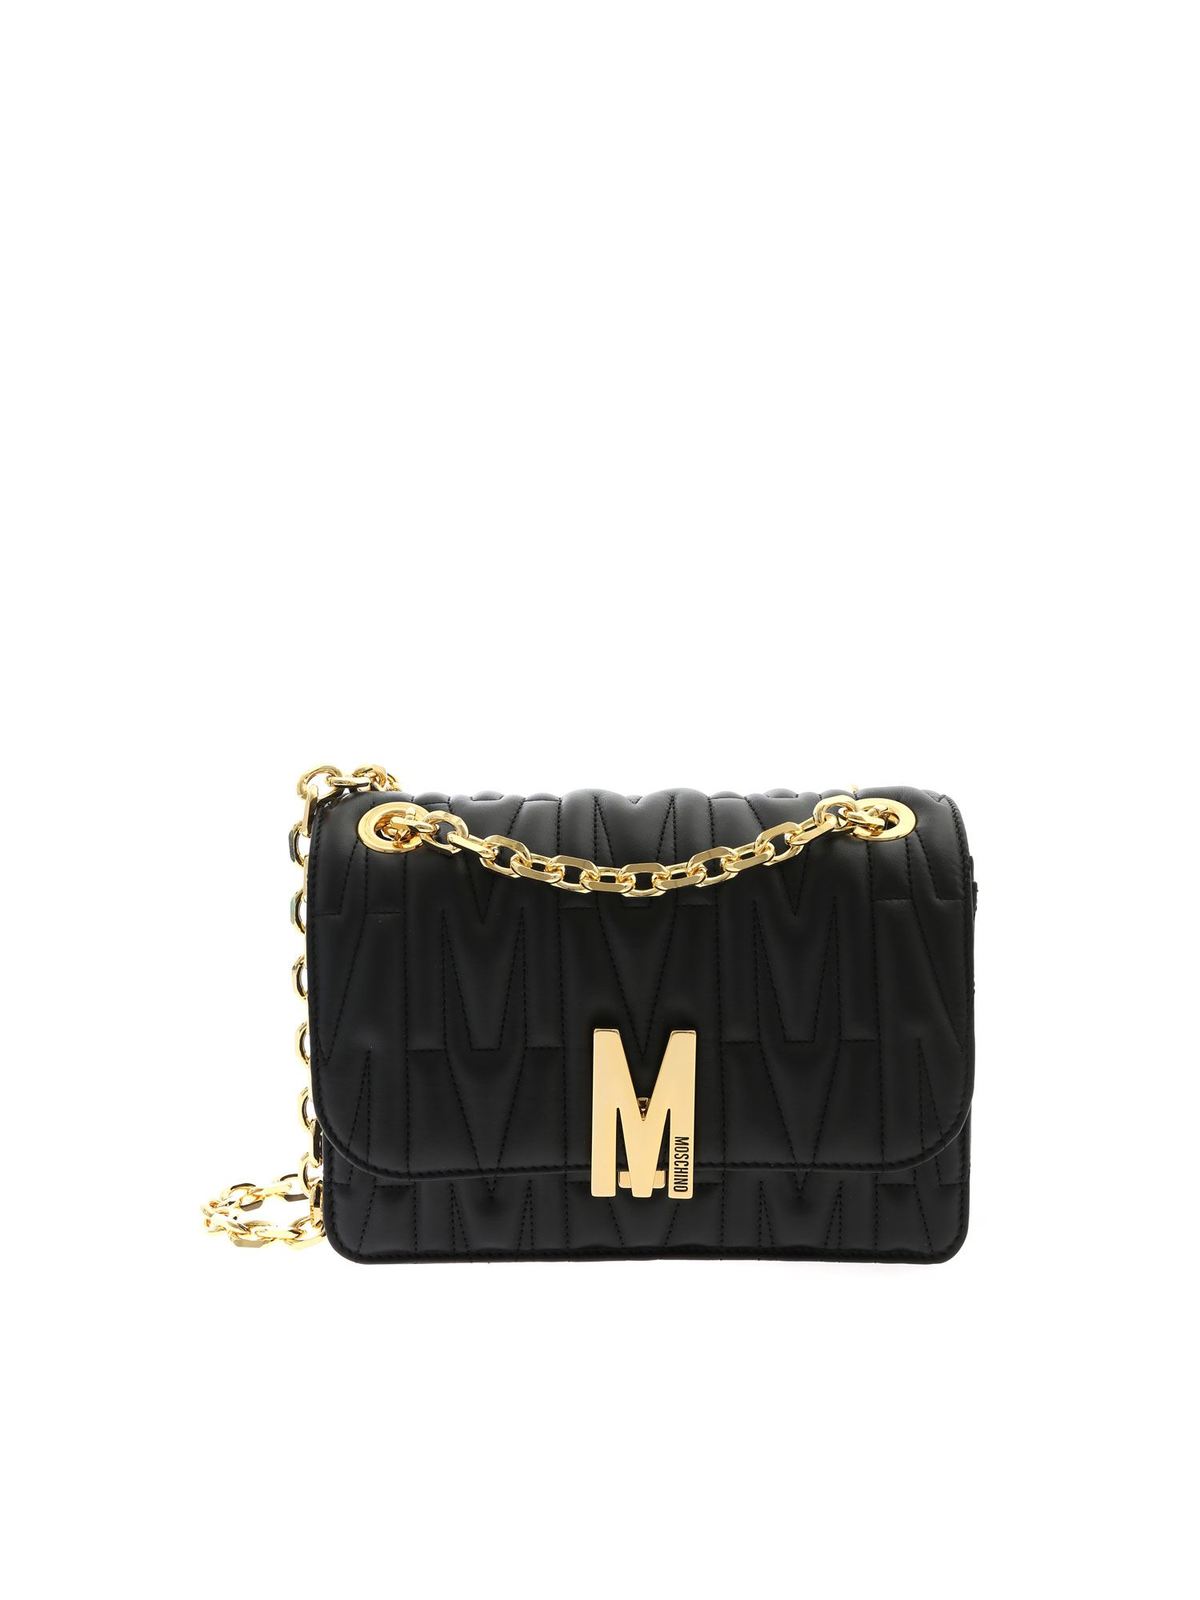 MOSCHINO M QUILTED LEATHER SHOULDER BAG IN BLACK